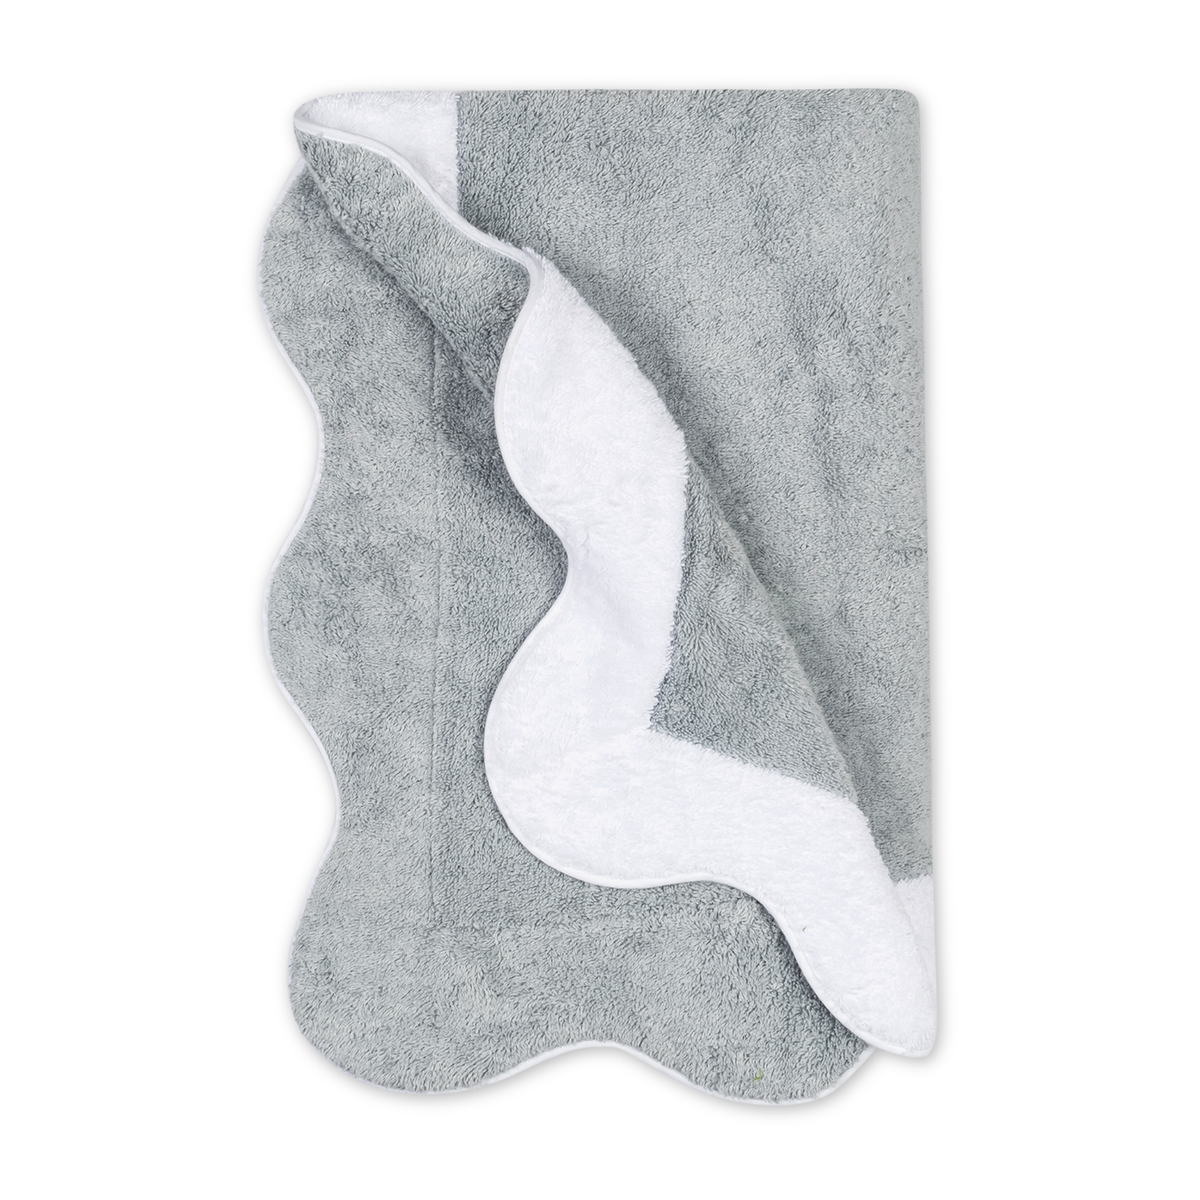 Folded Matouk Neptune Beach Towels in Pool/White Color